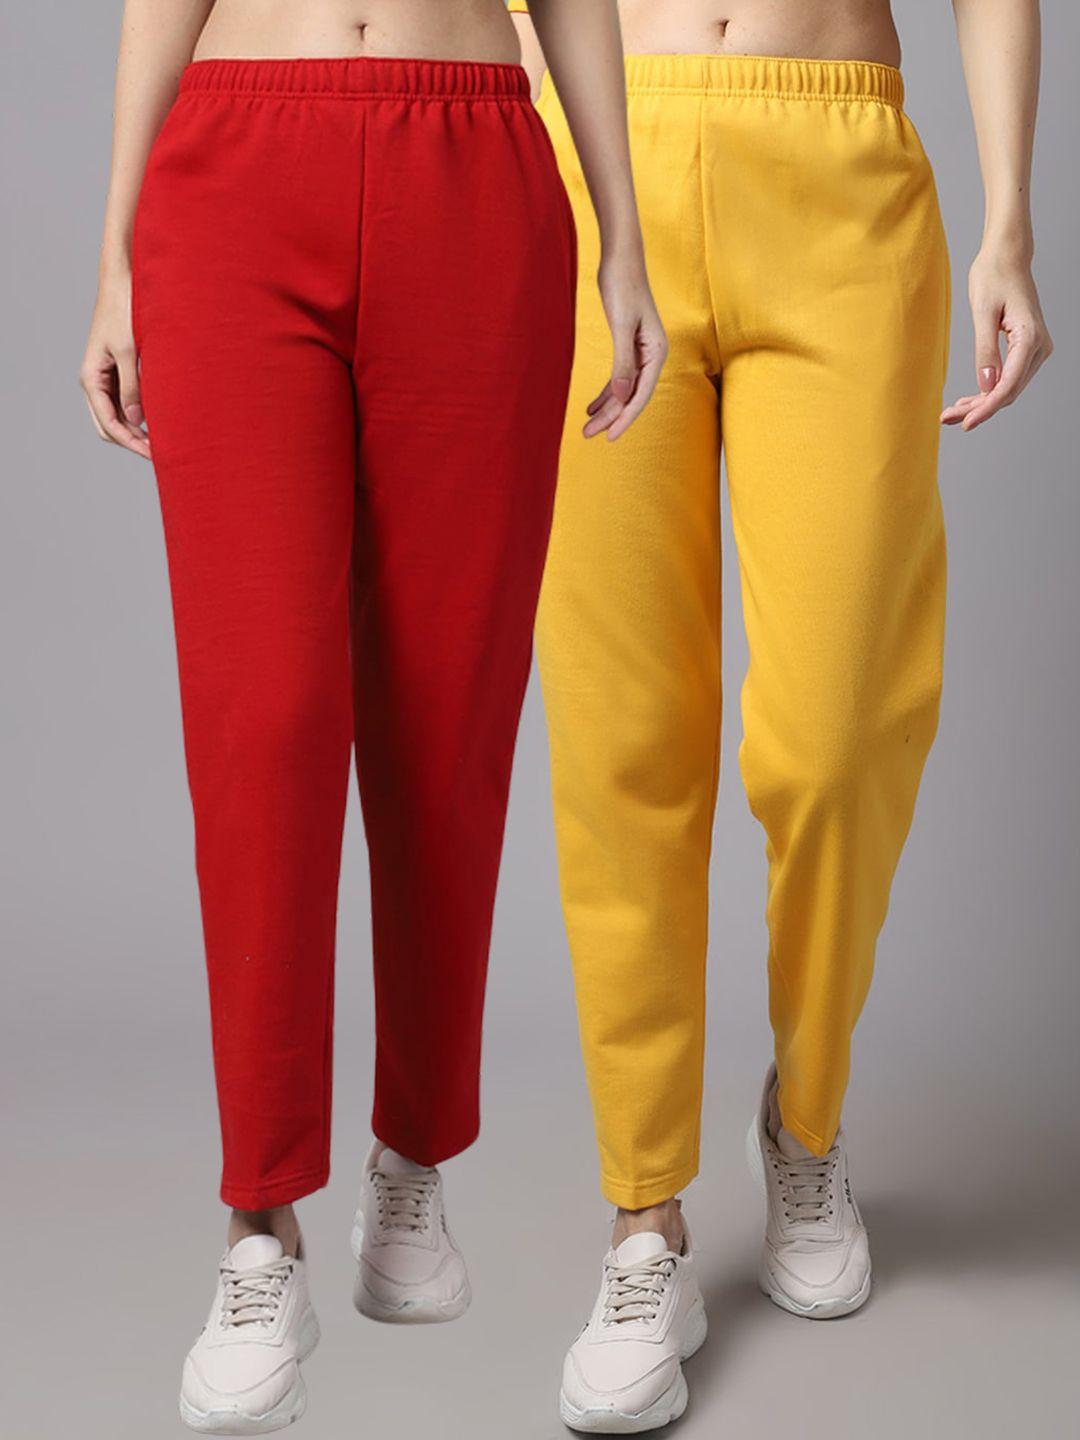 vimal jonney women pack of 2 red & yellow solid pure cotton track pants